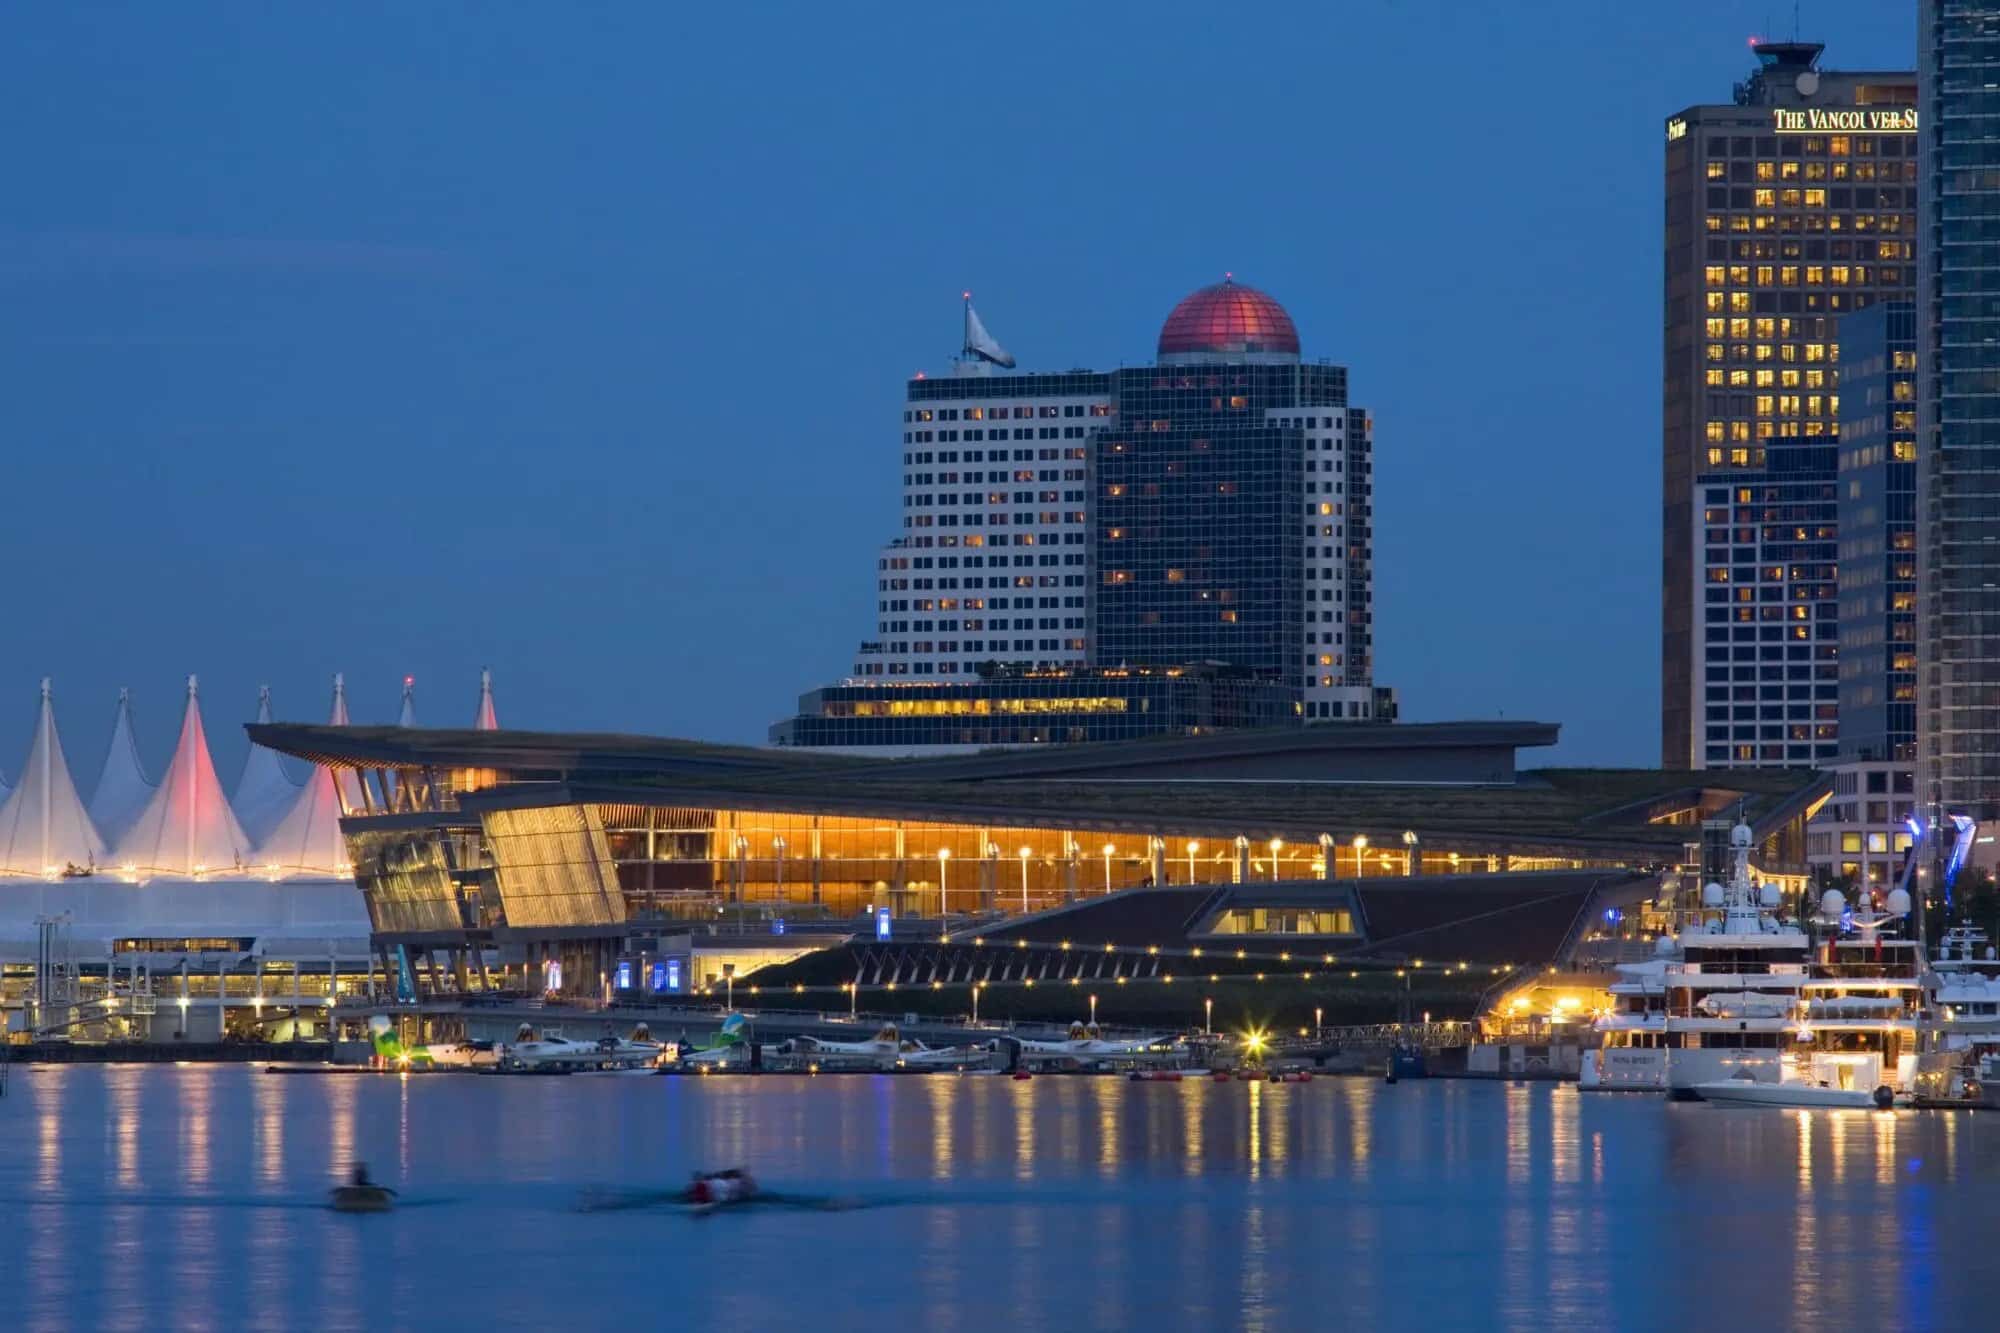 The exterior of Vancouver Convention Centre at dusk